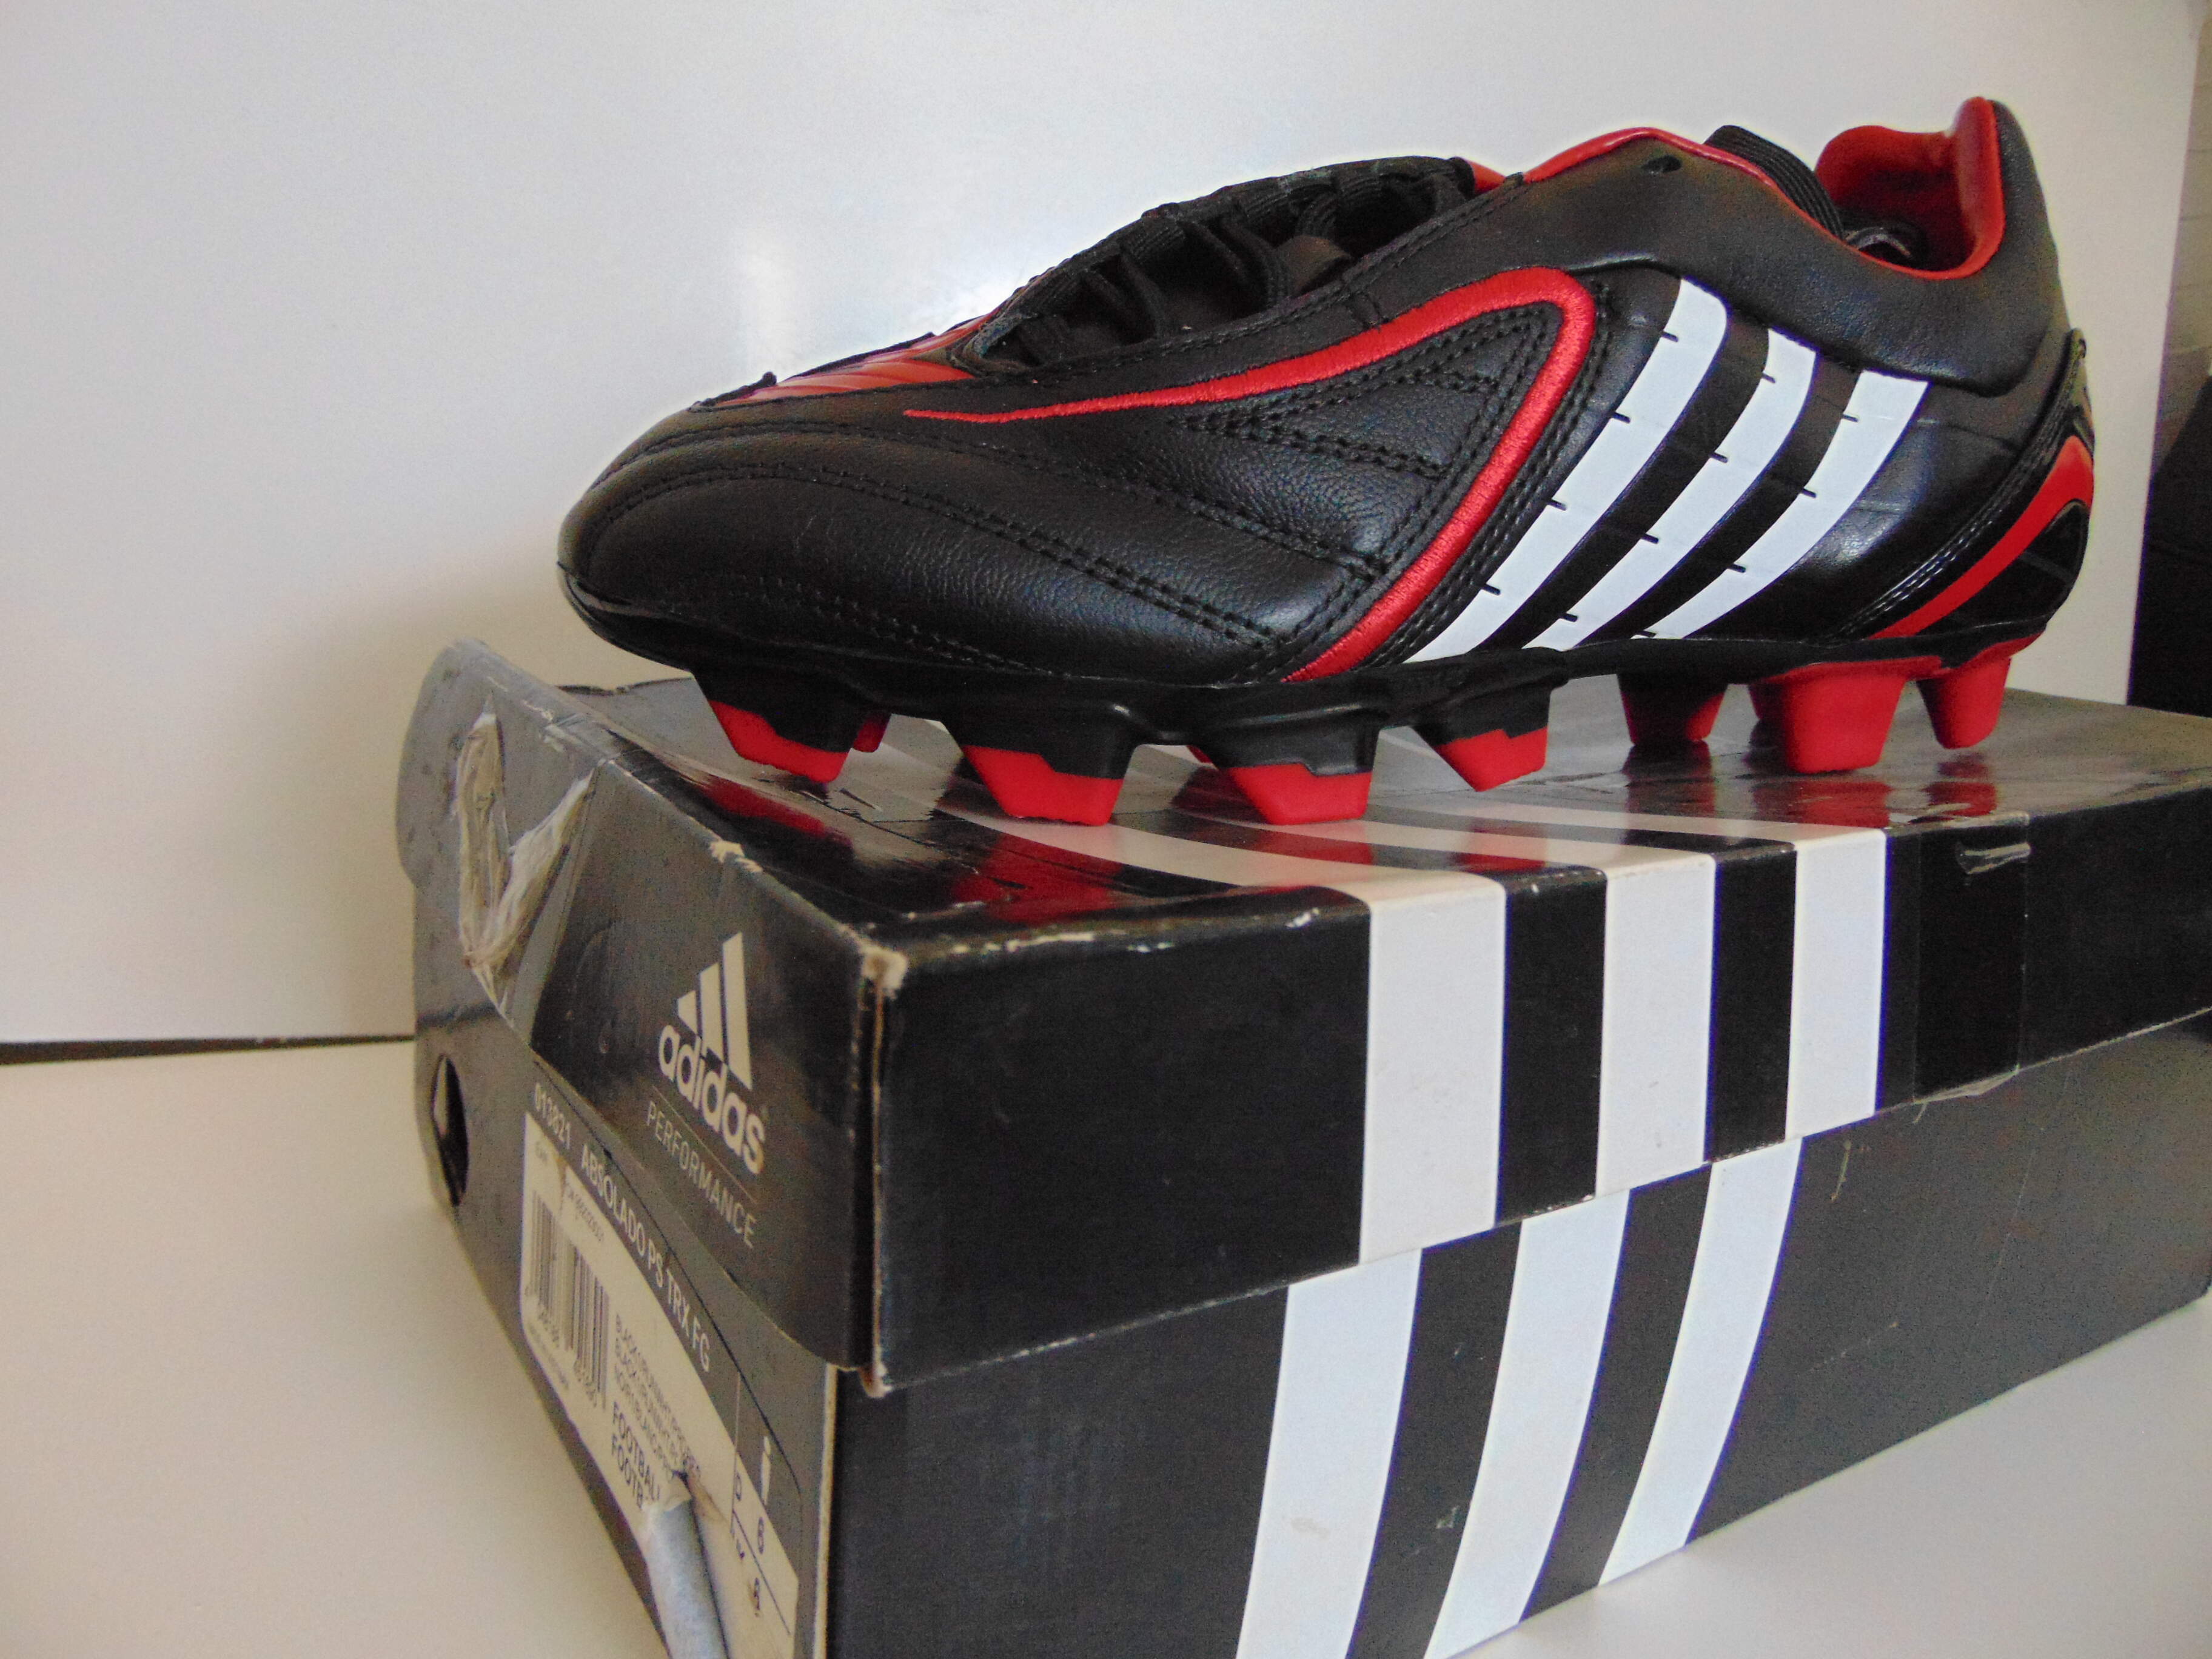 Adidas Absolado PS TRX FG Football Boots On Sale only 29.99 EX shop size UK 6